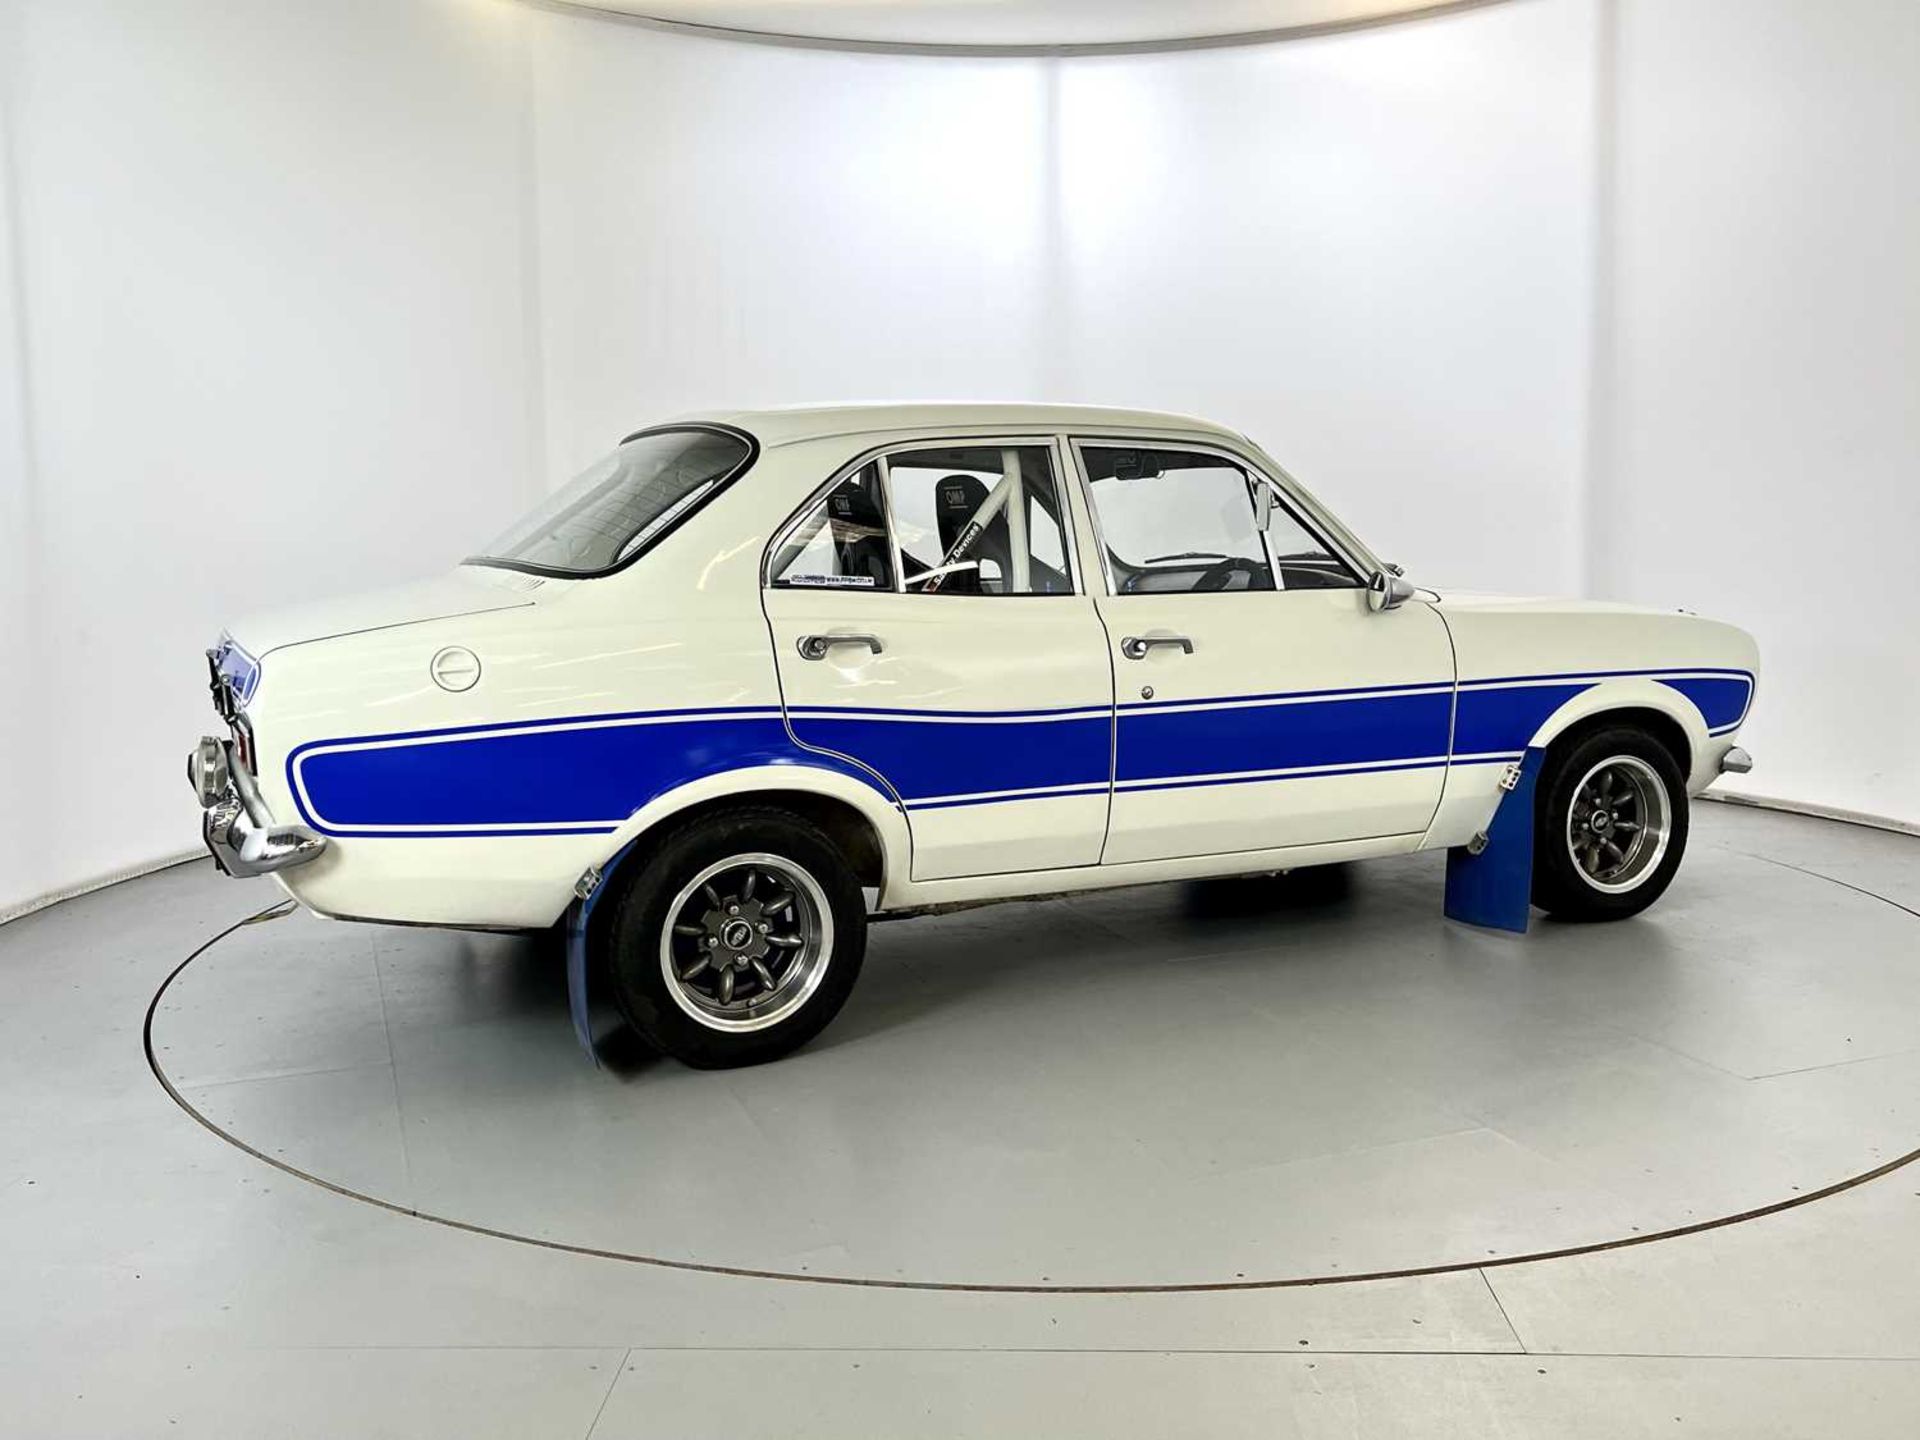 1970 Ford Escort - Image 10 of 30